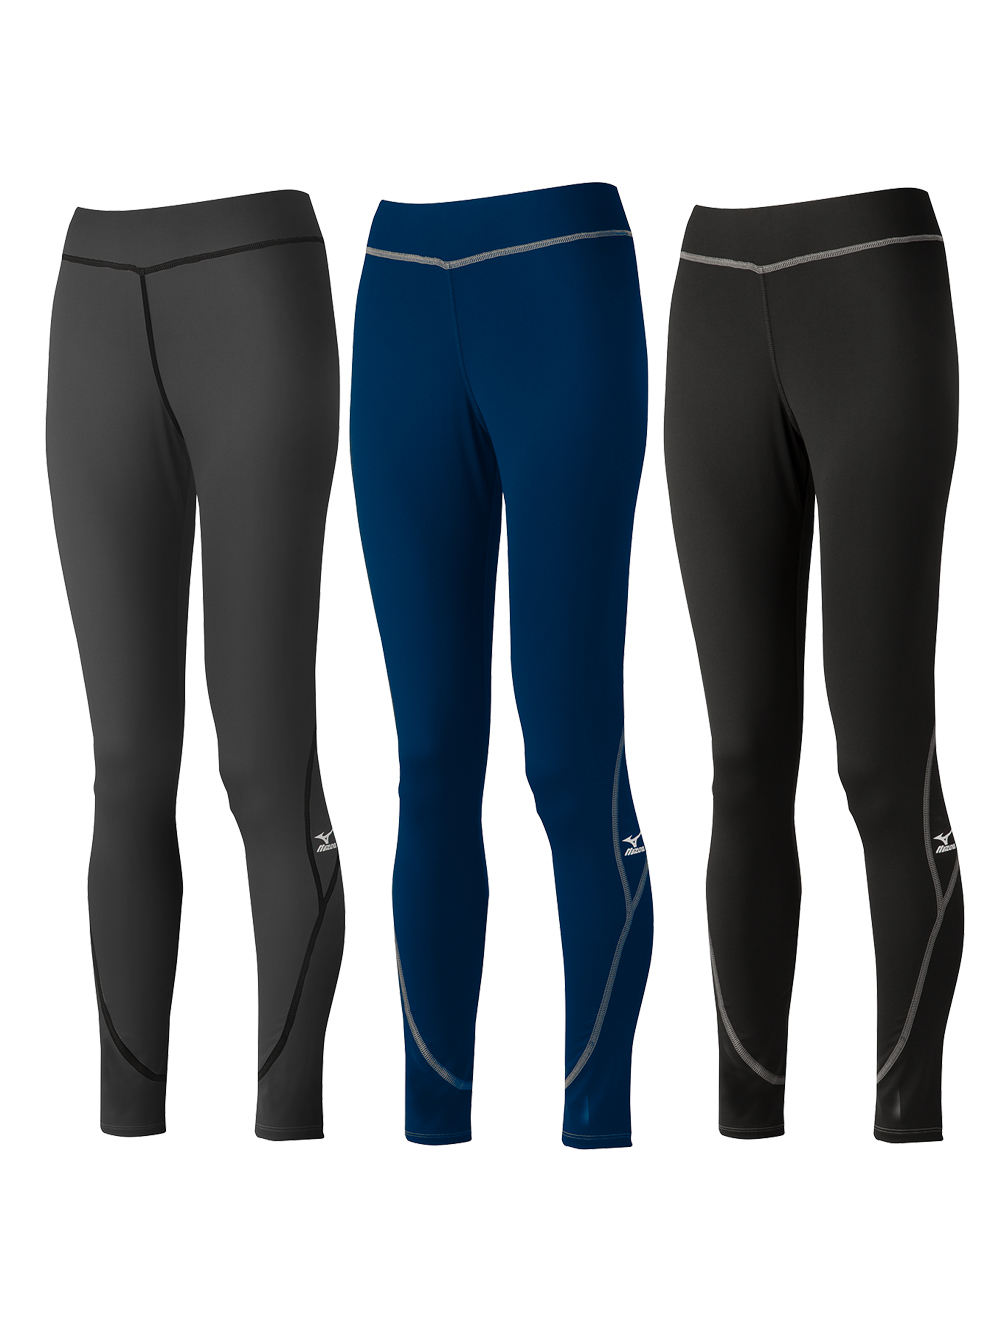 Buy Mizuno Align Volleyball Pant Online at Low Prices in India 